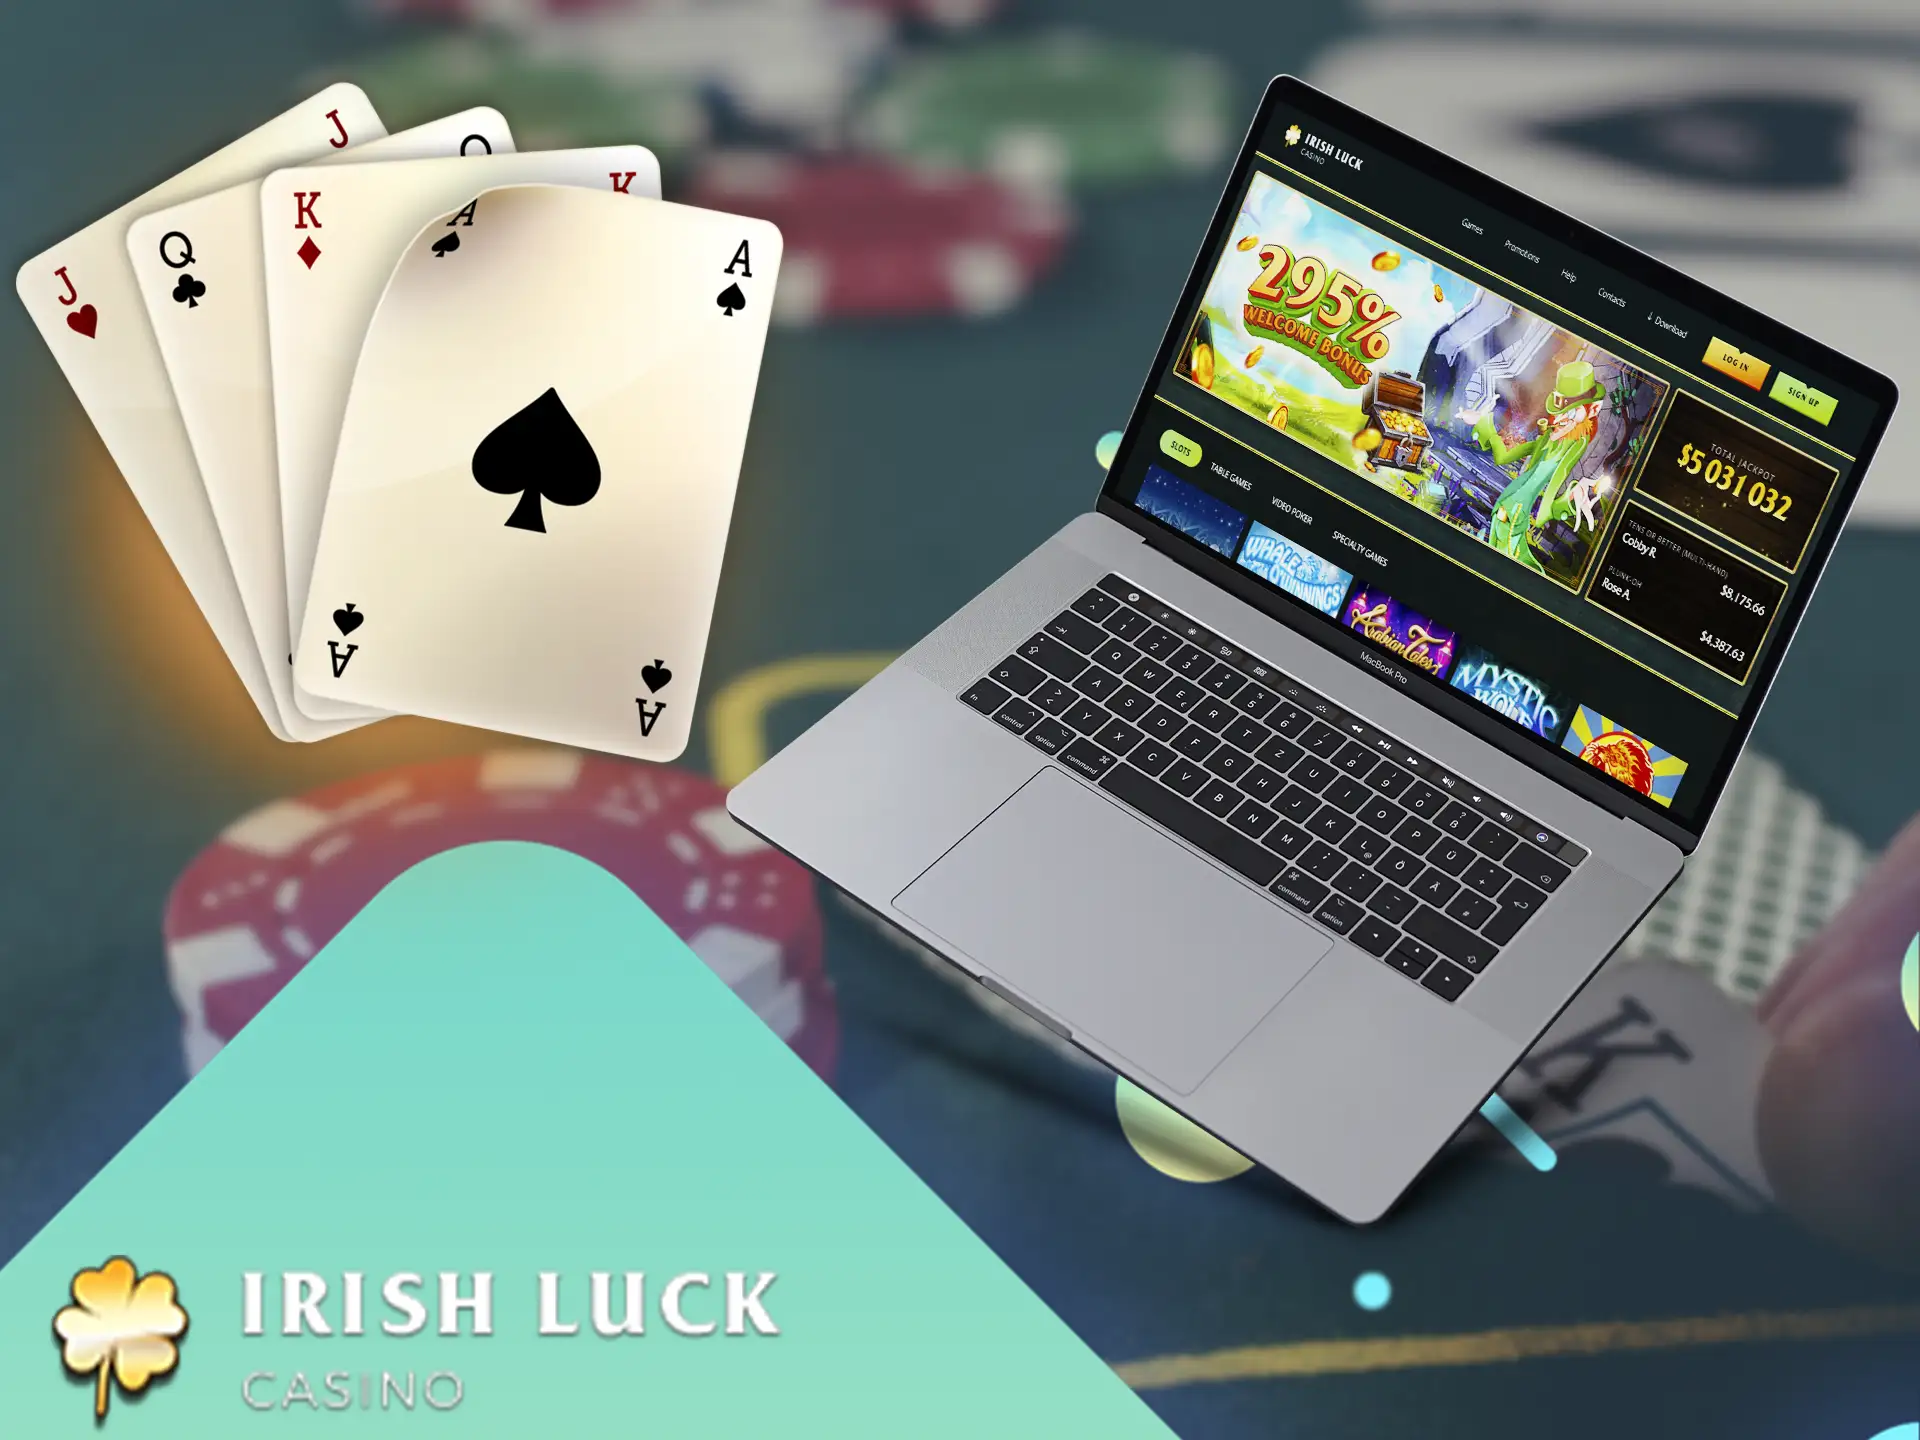 This section is available to play with real and virtual dealers, various card combinations are waiting for players Irish Luck.